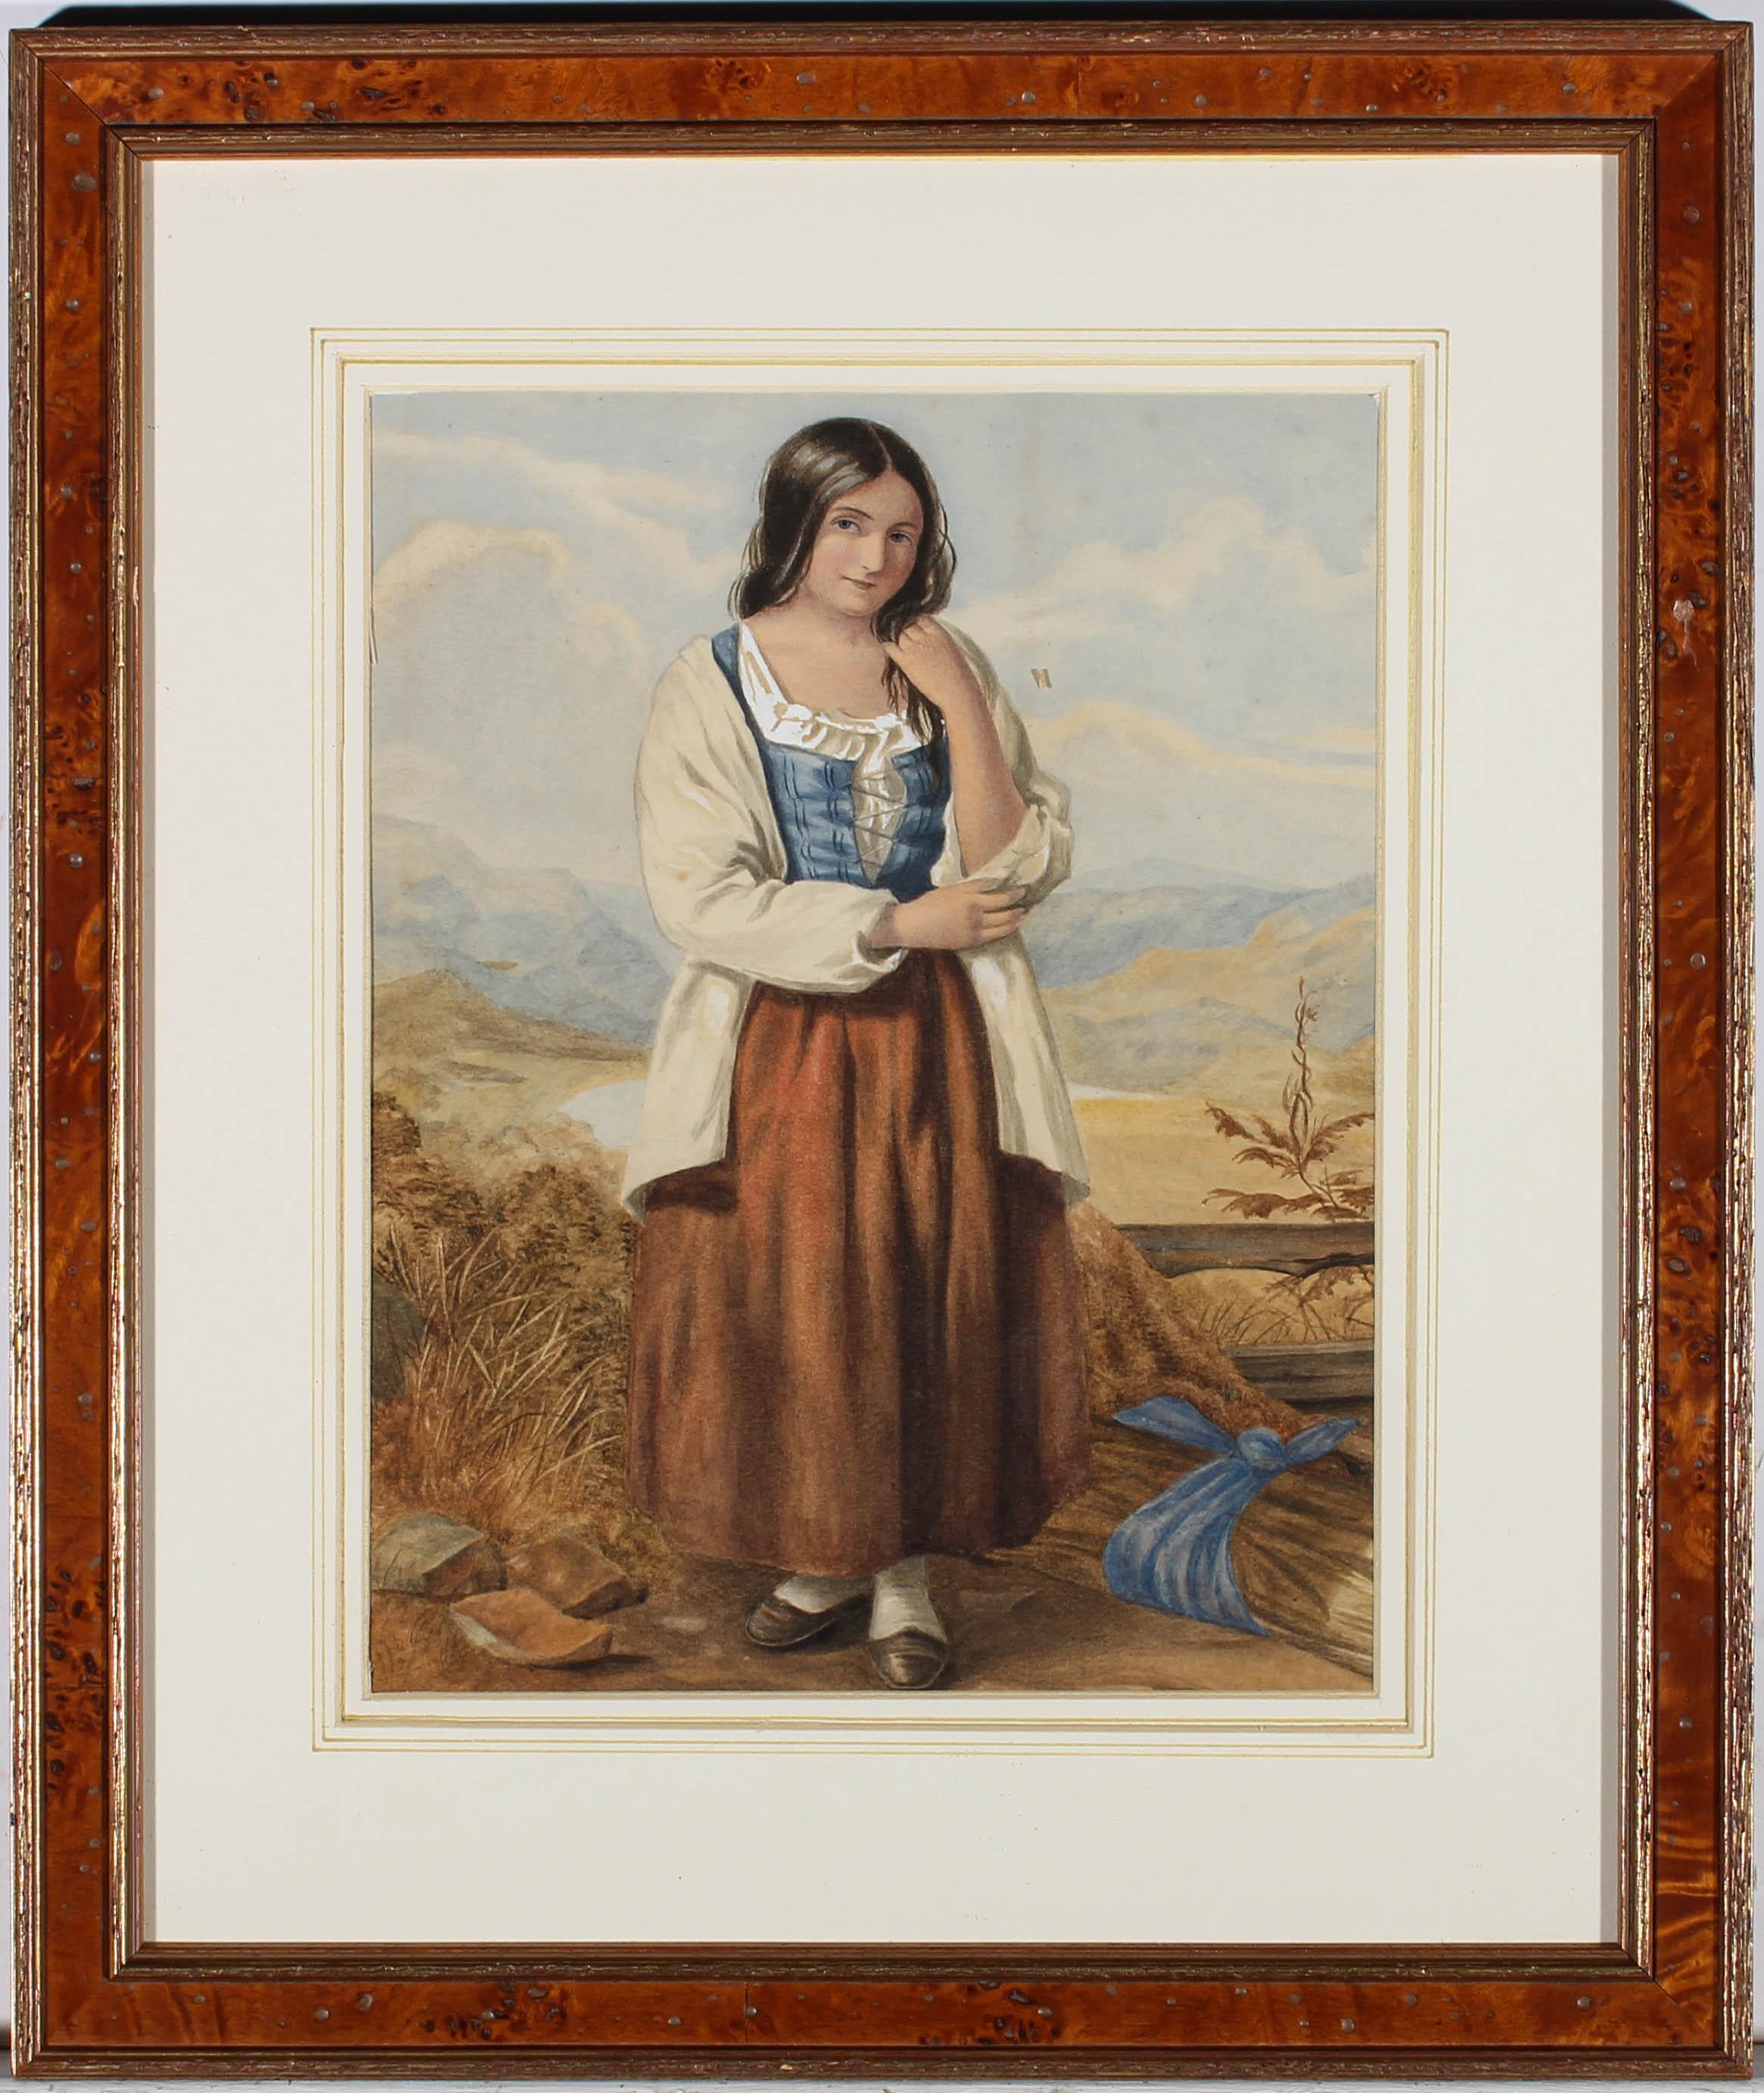 A fine mid 19th Century, English School watercolours, depicting a farm girl collecting corn. The young girl is wearing a fully length skirt, blue corset and oversized white shirt. The painting is well presented in a walnut veneer wooden frame, with